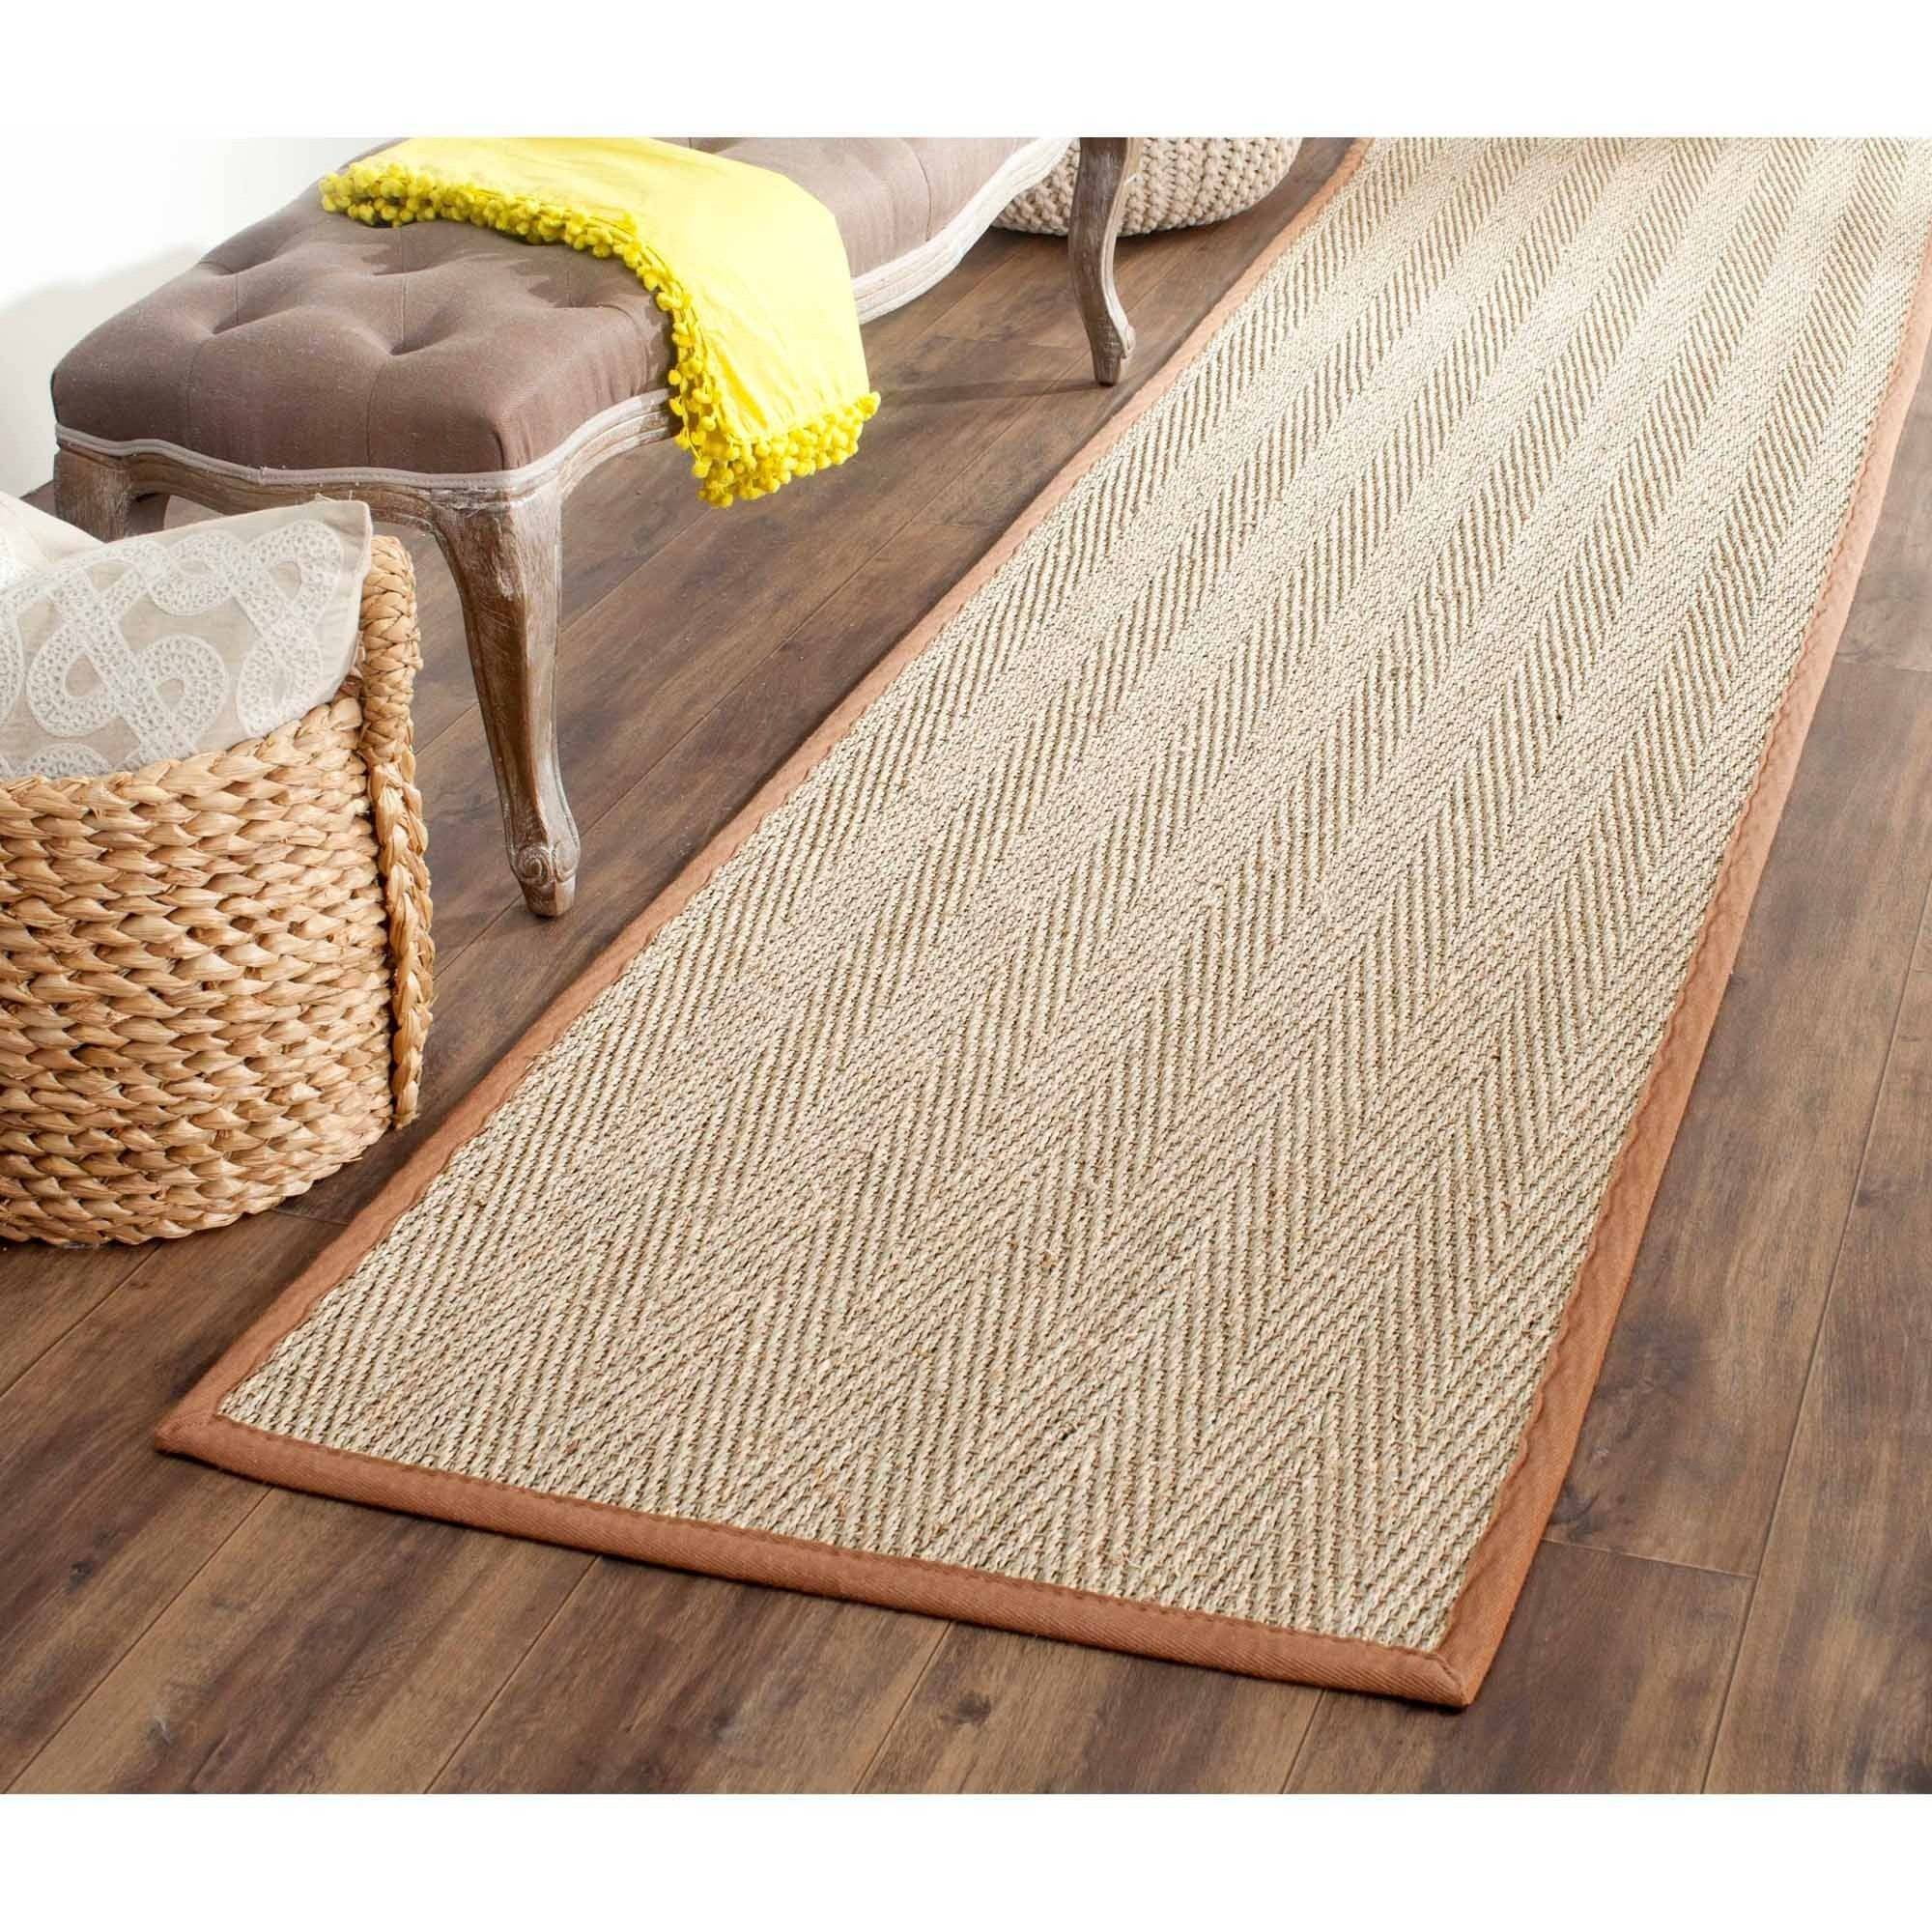 for sale online 2'6 X 12' Hand-woven Sisal Natural/ Brown Seagrass Runner 